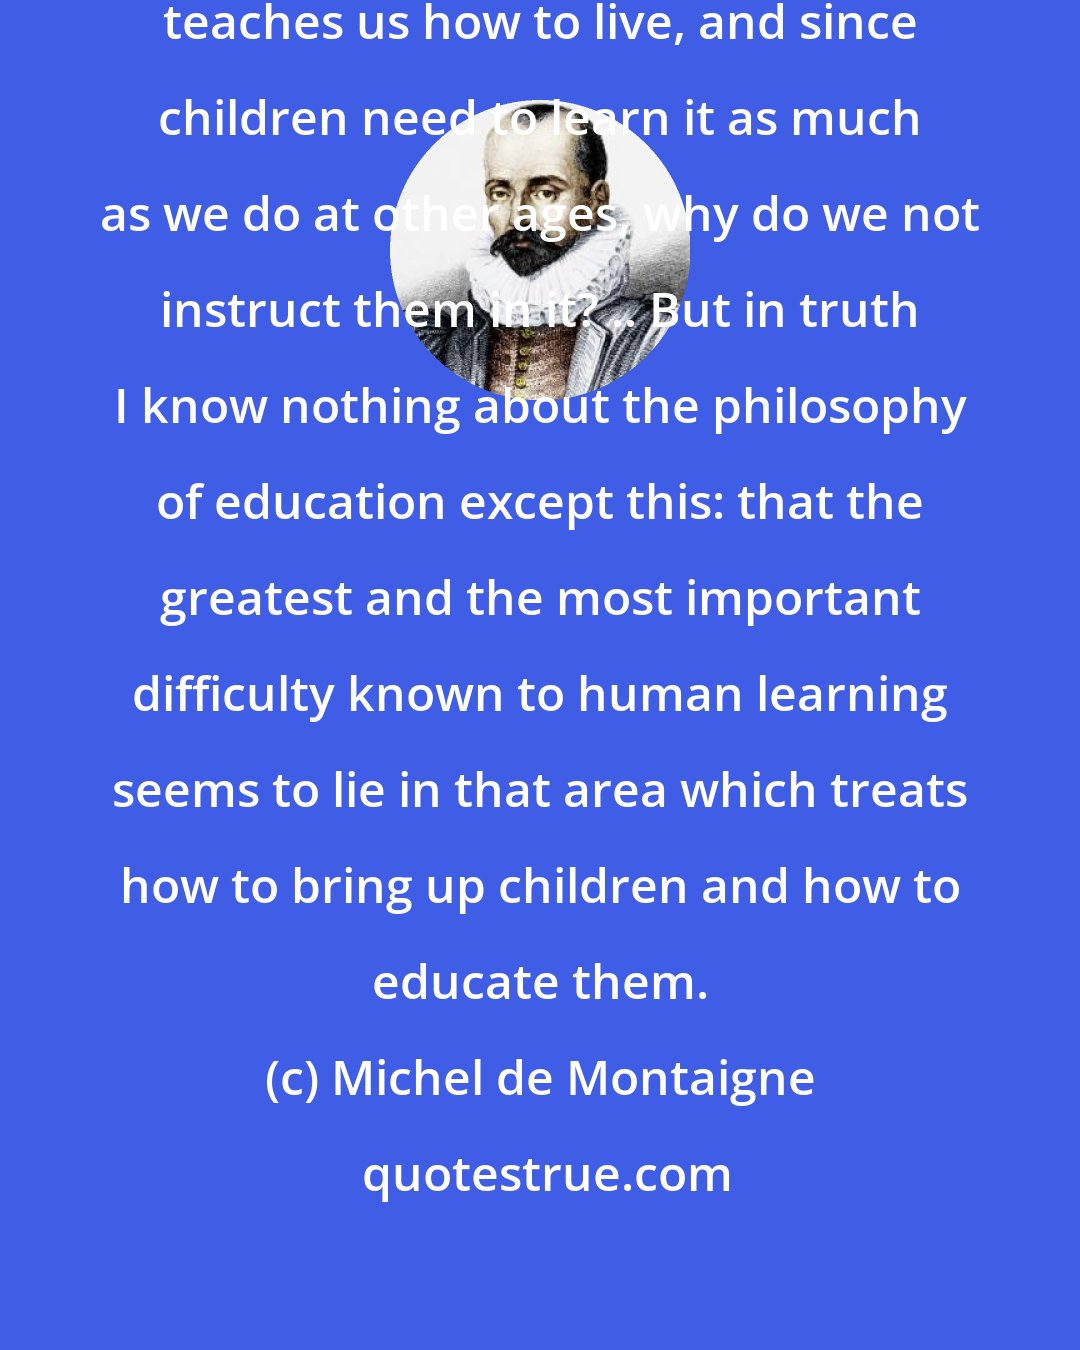 Michel de Montaigne: Since philosophy is the art which teaches us how to live, and since children need to learn it as much as we do at other ages, why do we not instruct them in it? .. But in truth I know nothing about the philosophy of education except this: that the greatest and the most important difficulty known to human learning seems to lie in that area which treats how to bring up children and how to educate them.